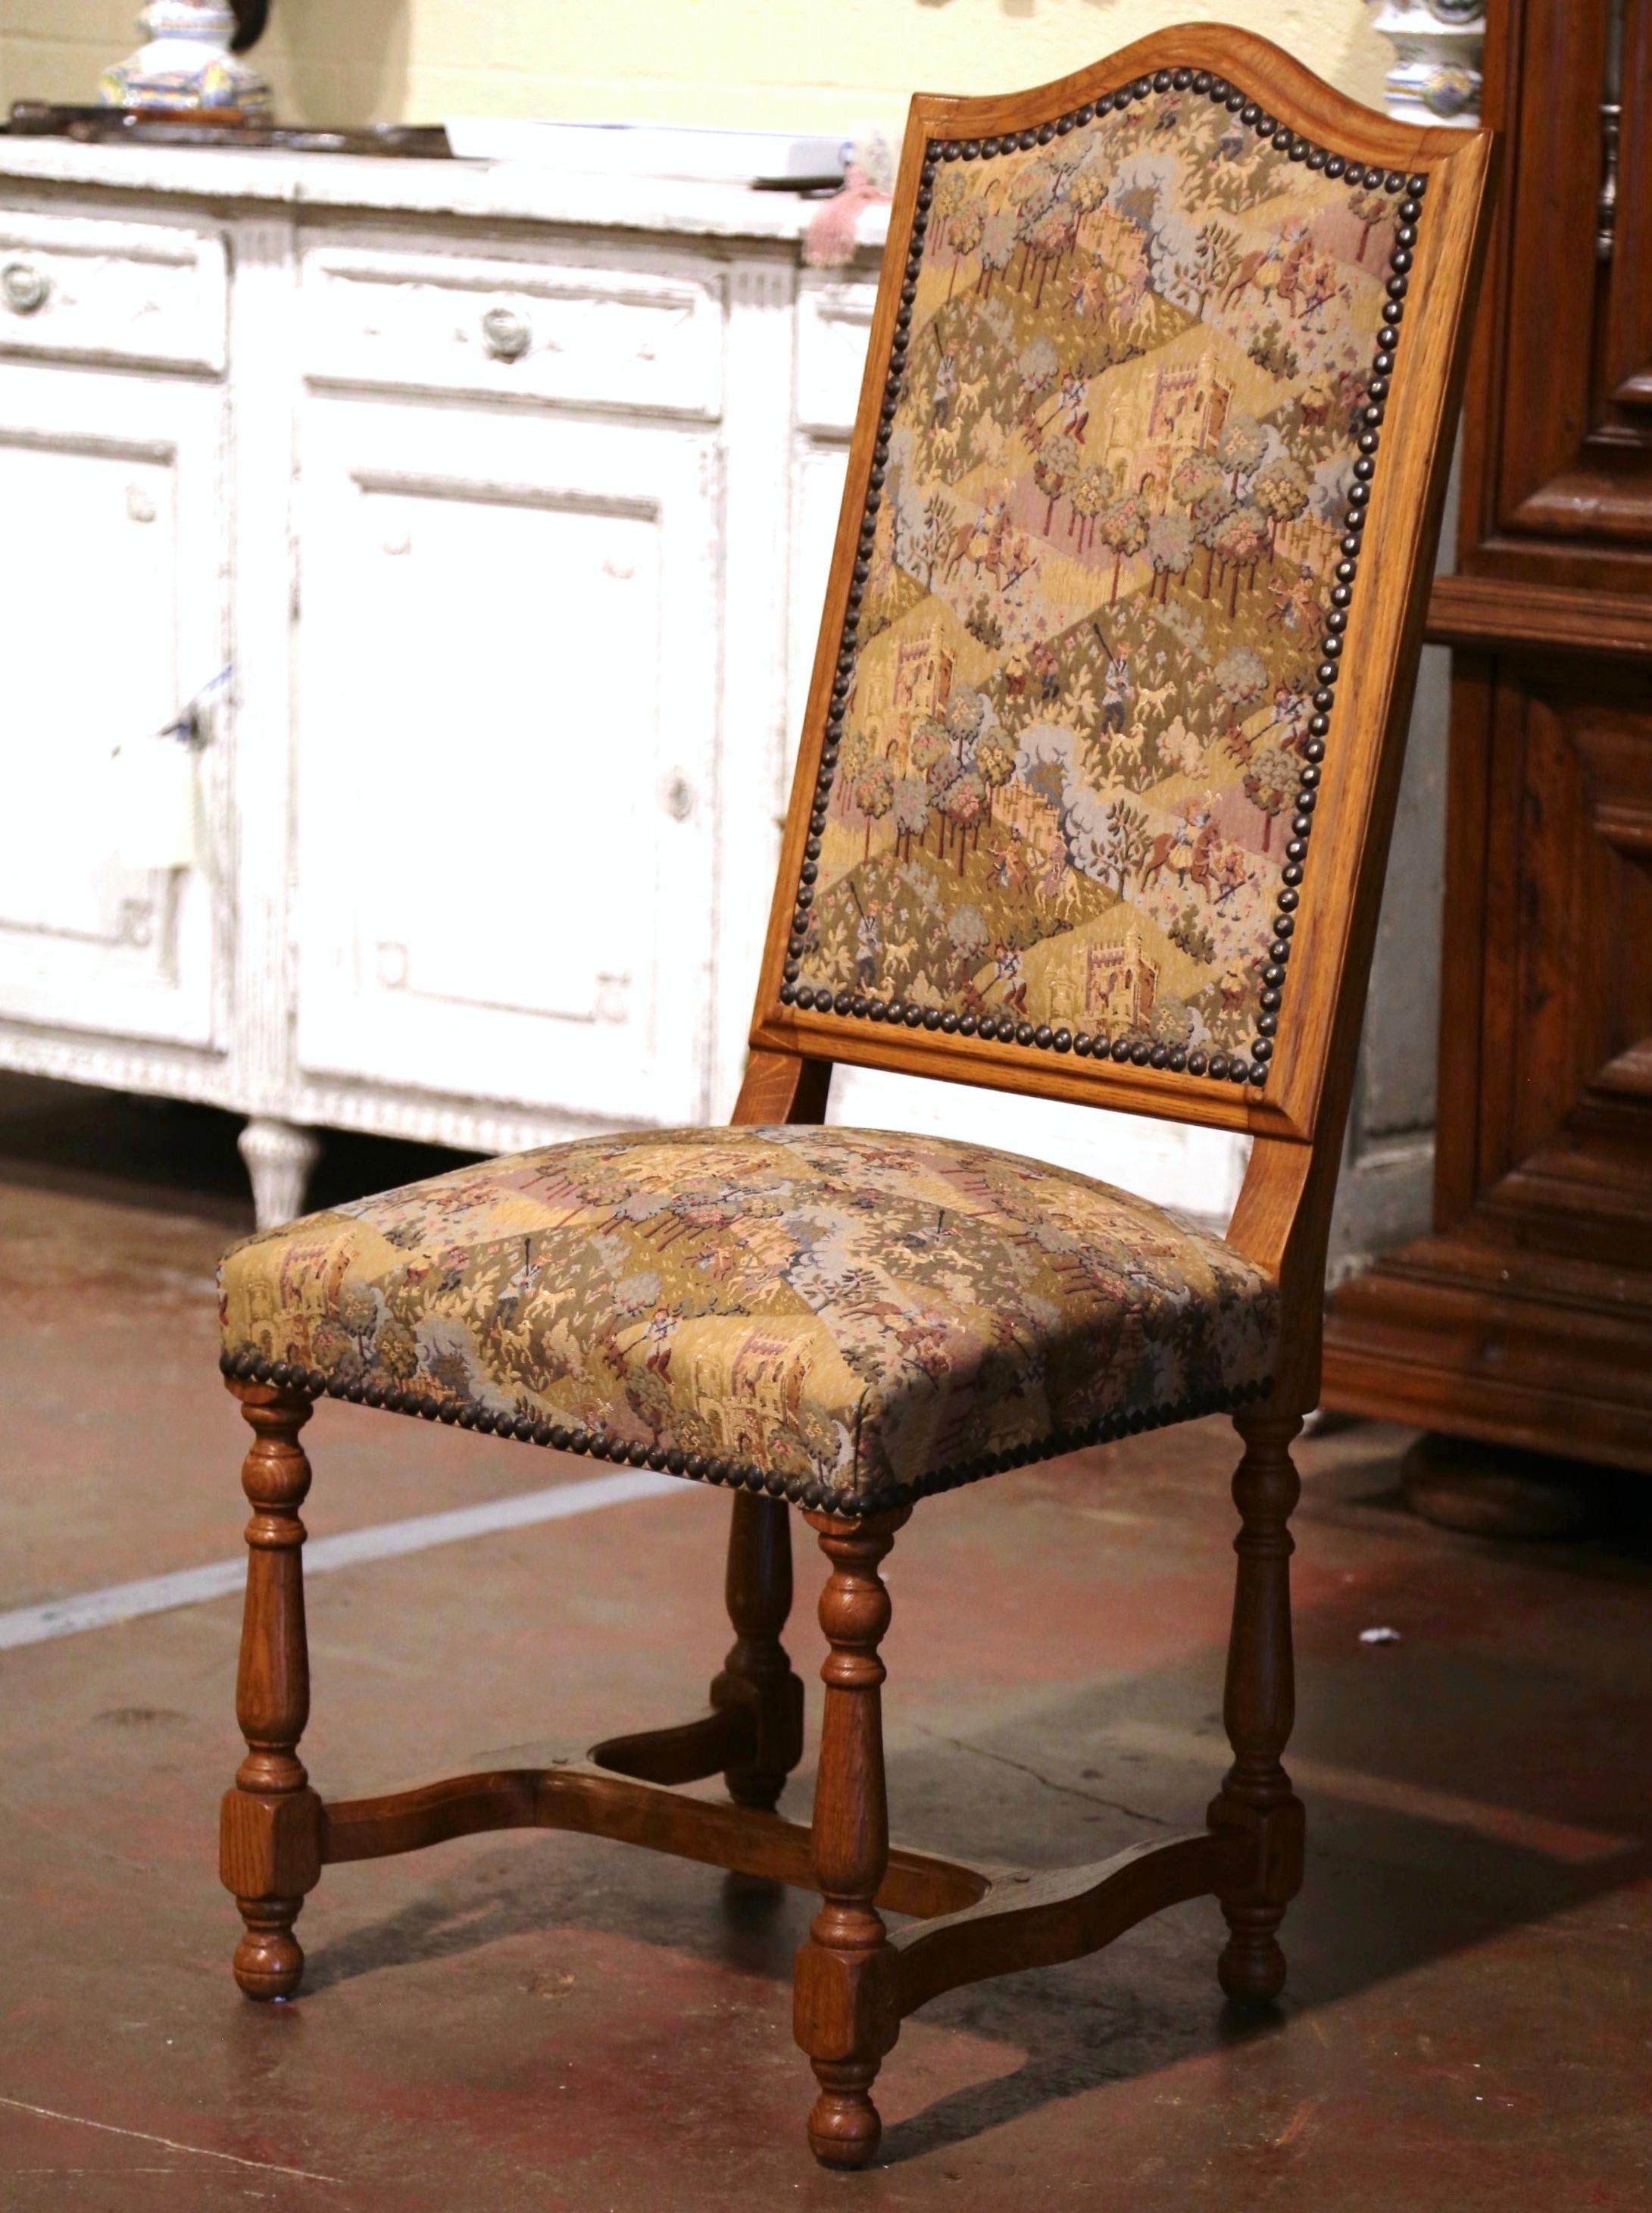 Dress a large dining table with this set of fourteen high back chairs; crafted in southern France circa 1980, each fruit wood chair sits on turned legs ending with bun feet, and connected with a bottom stretcher. Each chair features a tall pitched